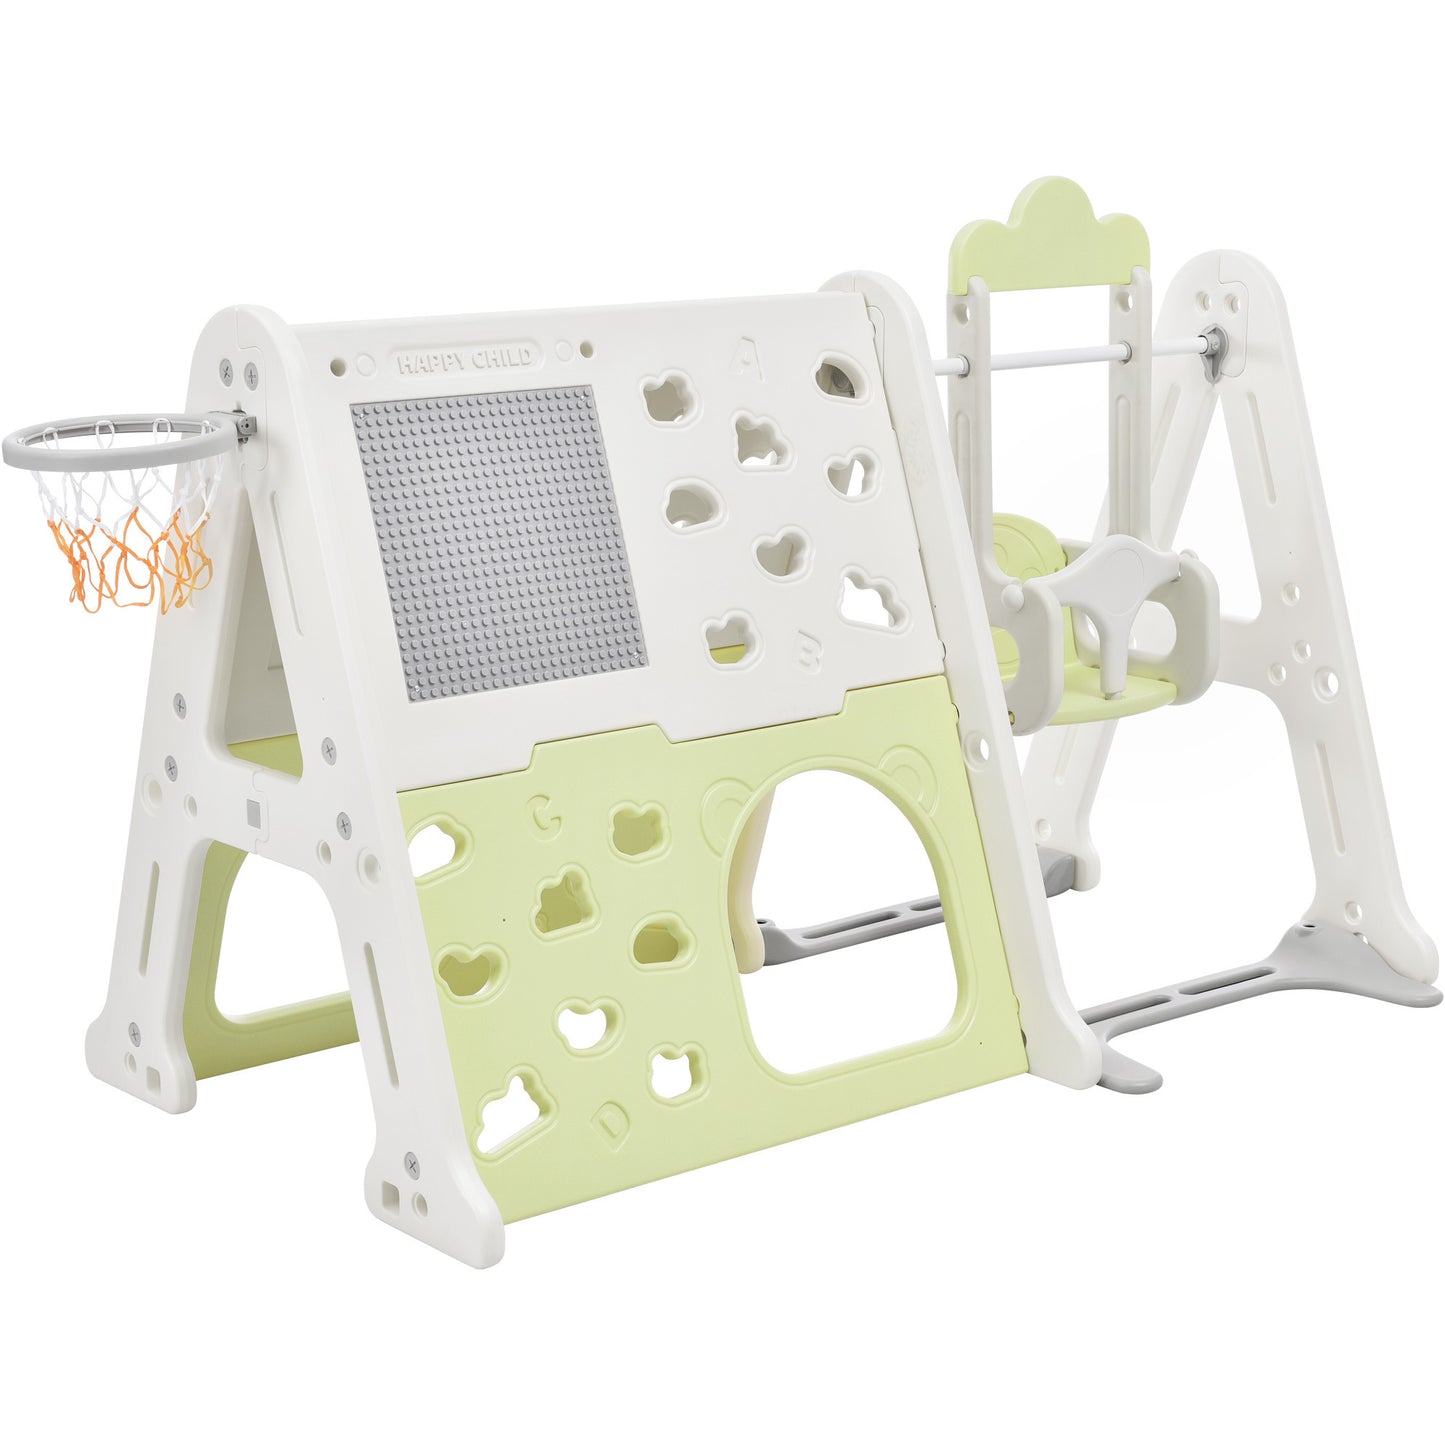 6-in-1 Toddler Climber and Swing Set Kids Playground